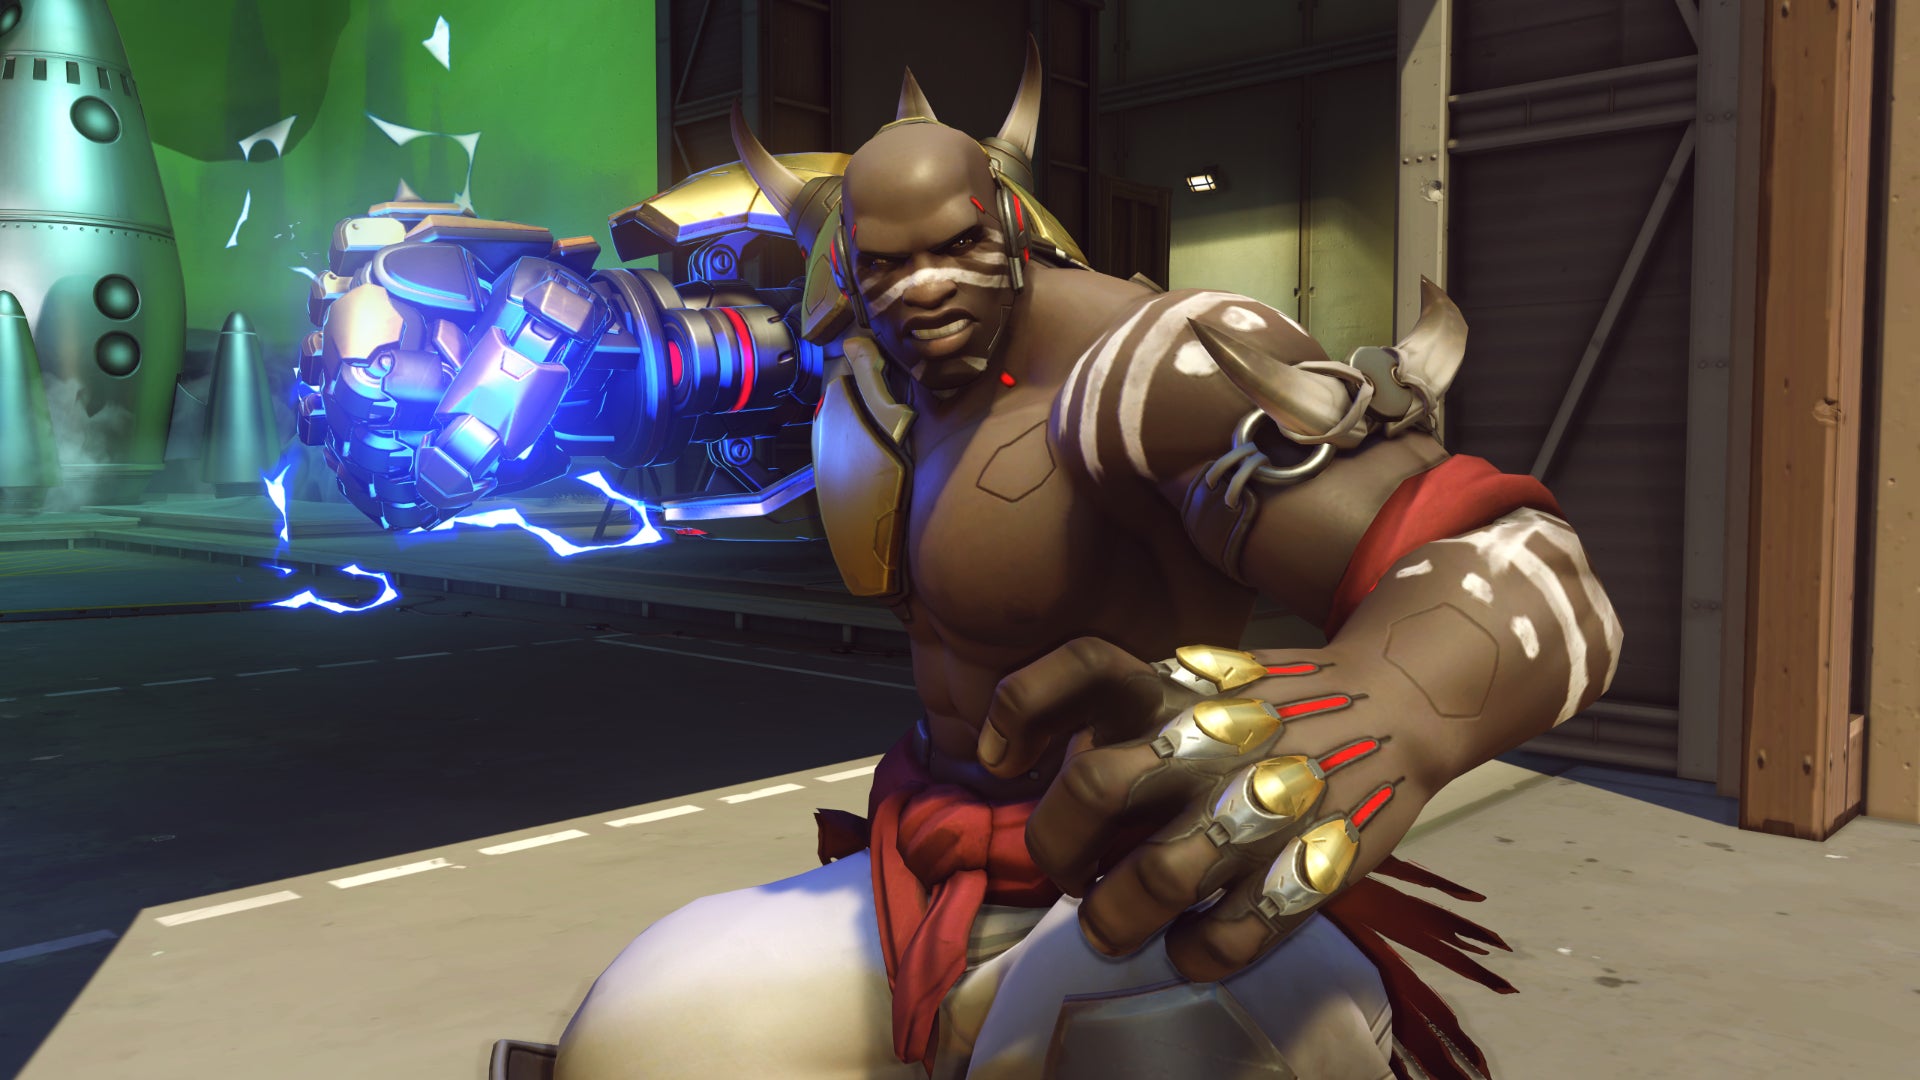 Doomfist, a hero in Overwatch 2, winds up a punch with his gauntlet.